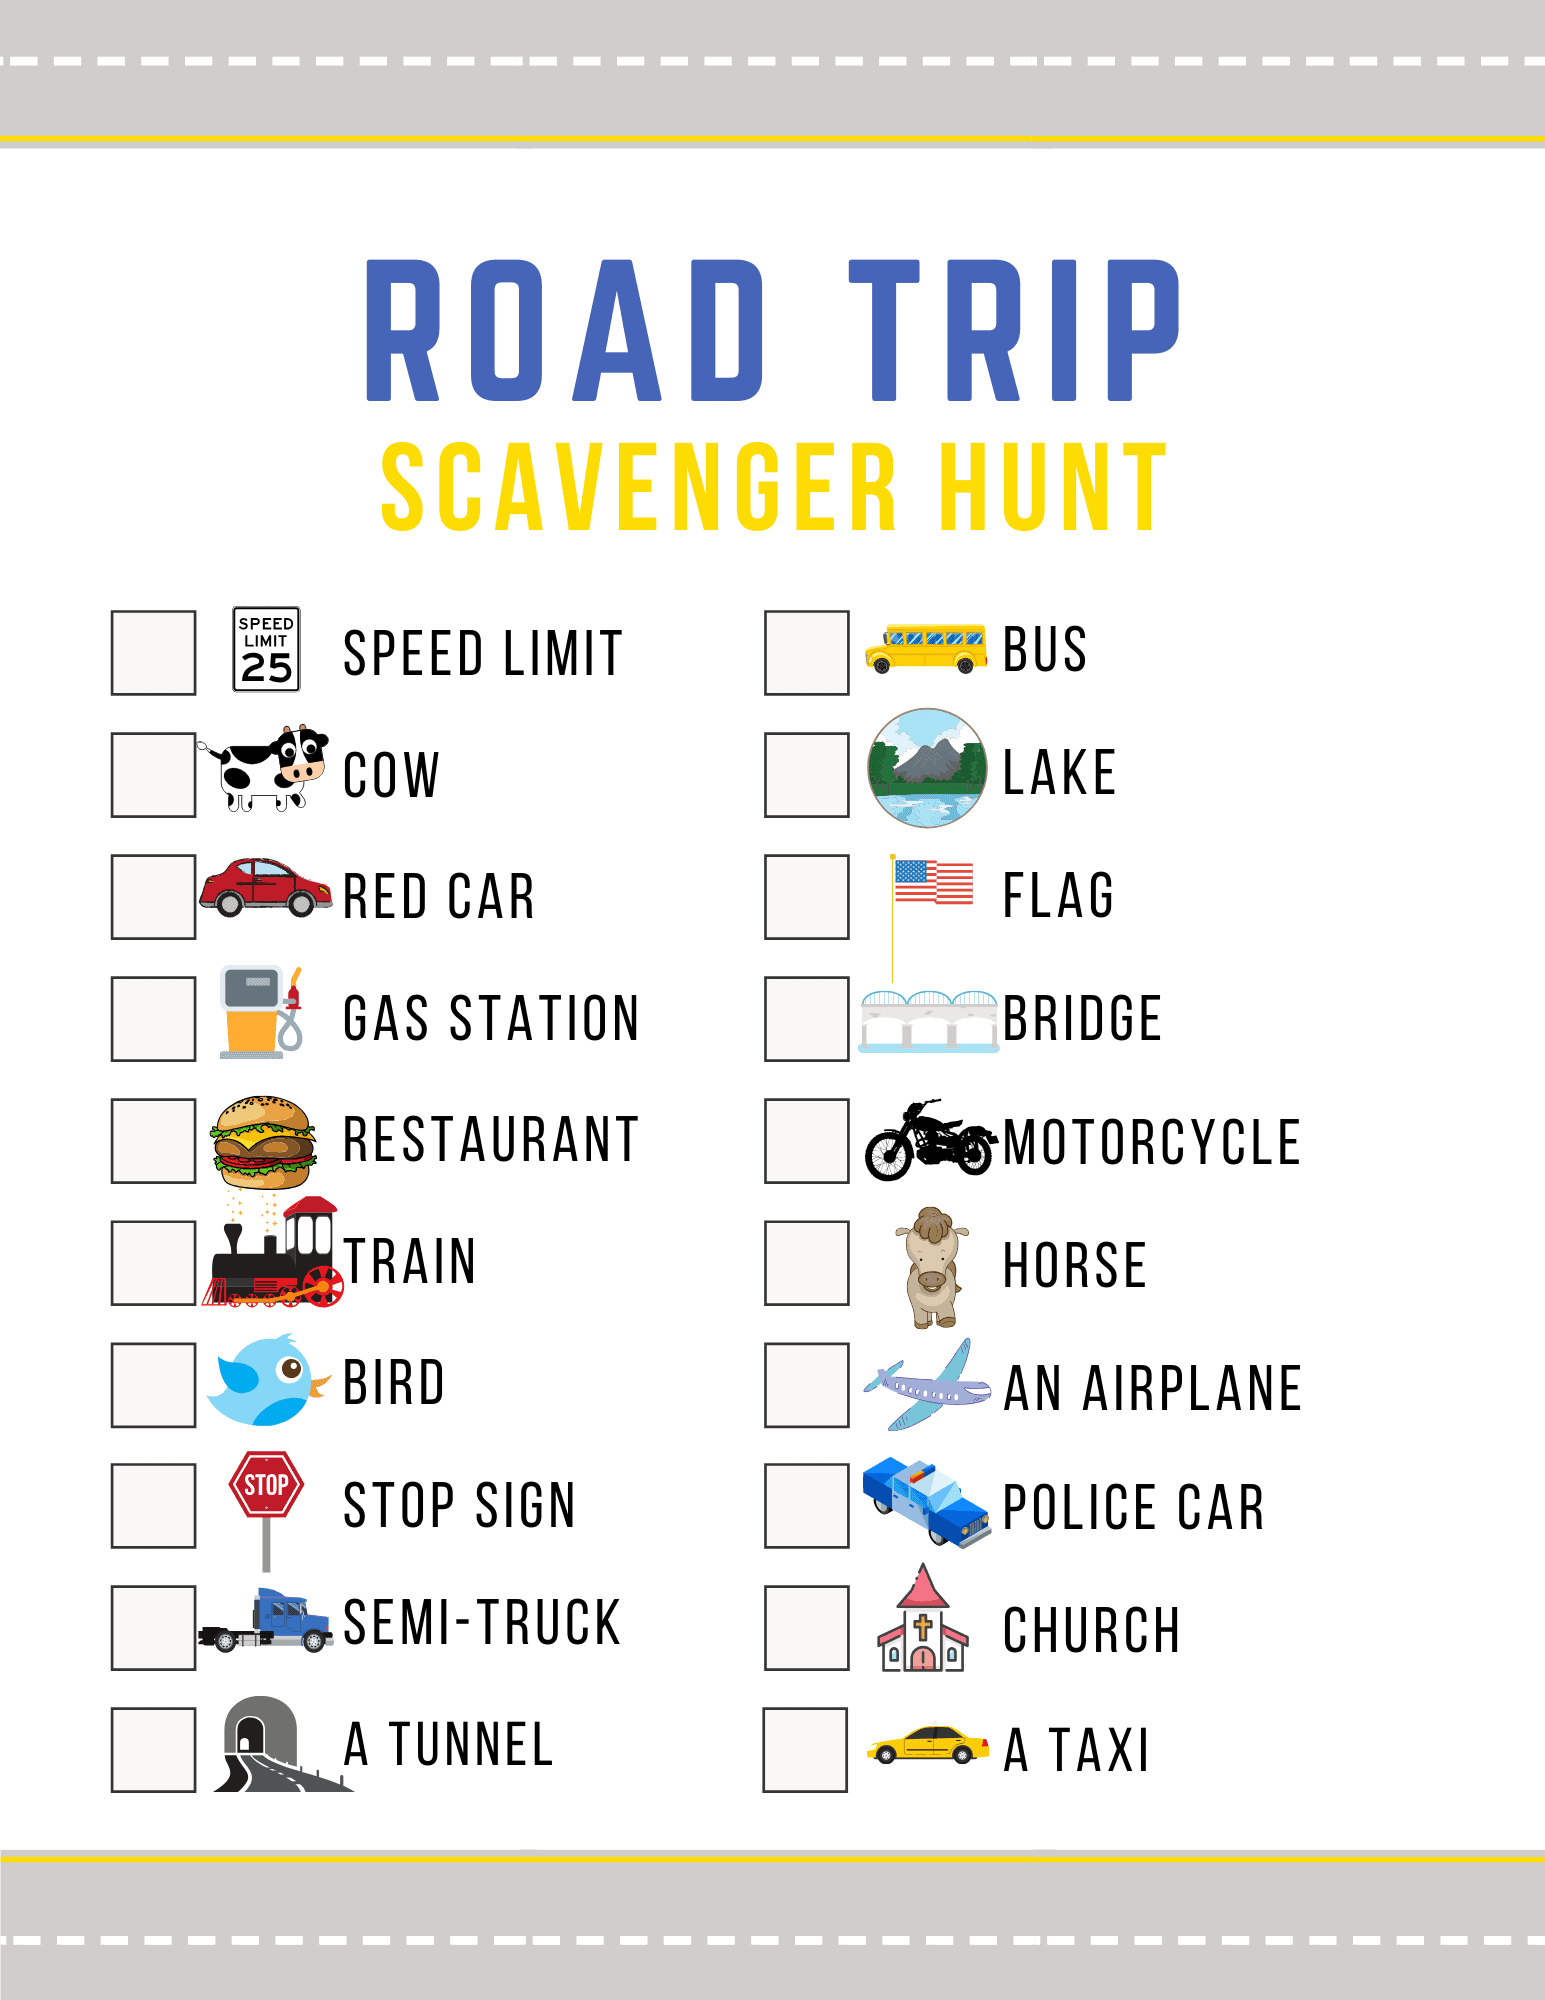 things to remember for road trip